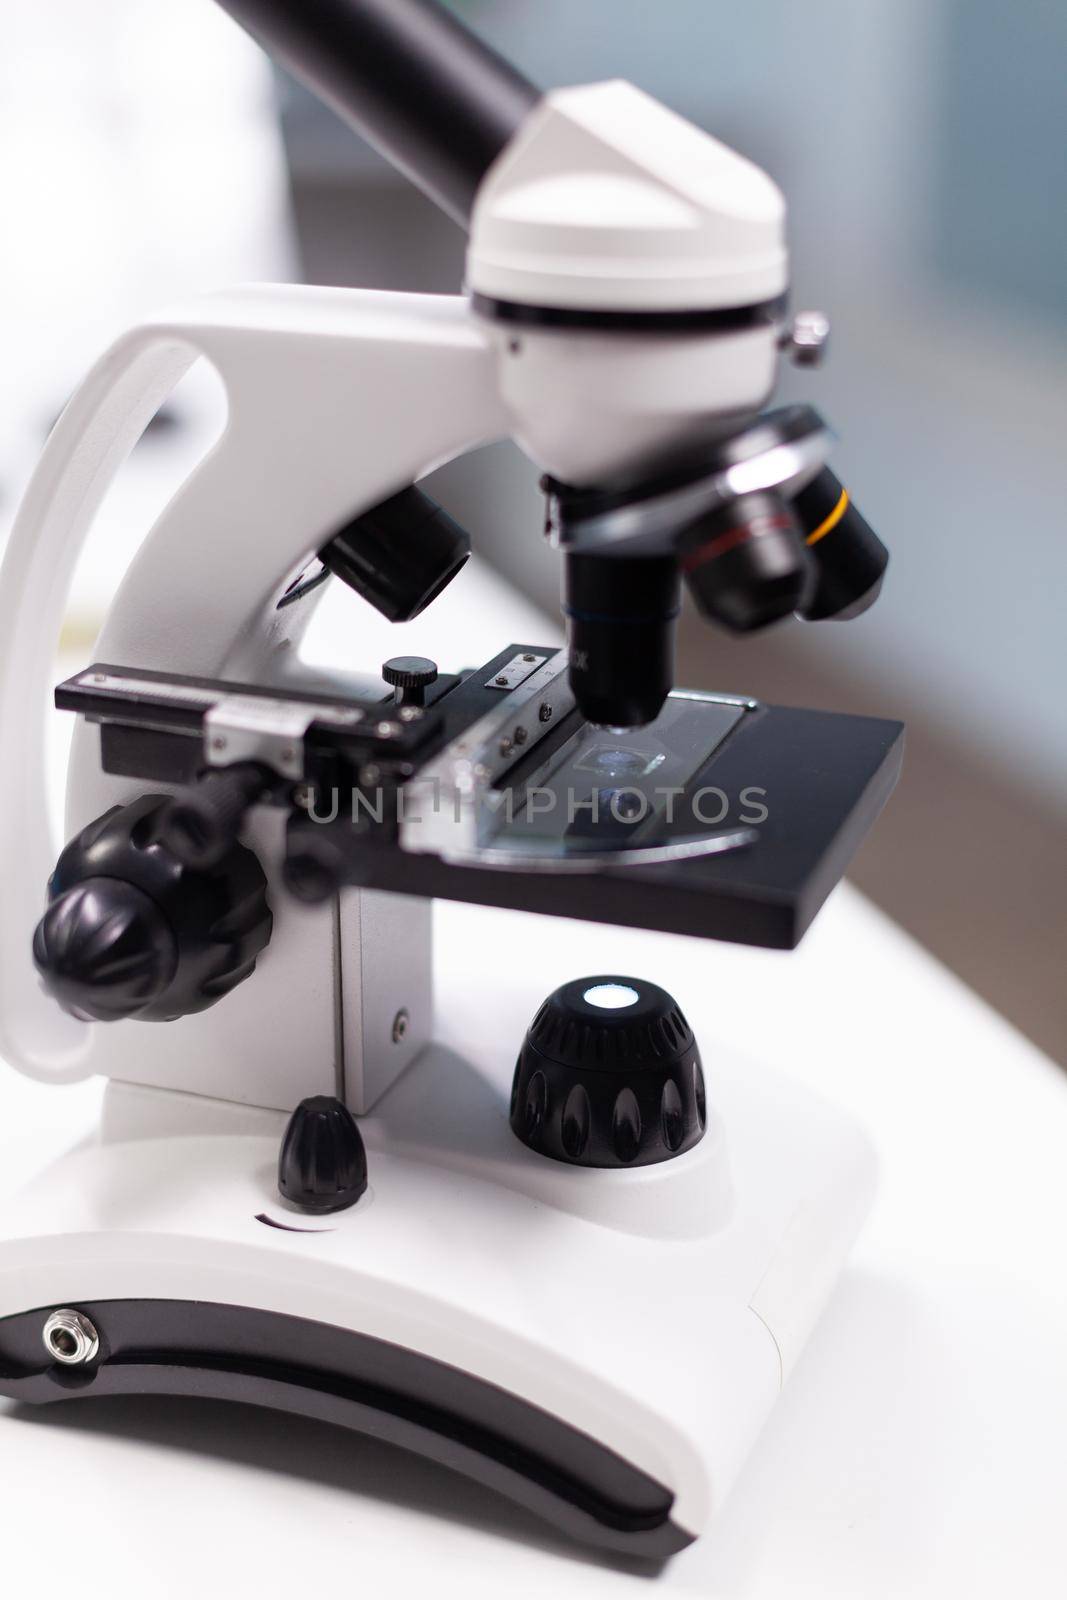 Dna molecular sample under microscope ready for biological virus vaccine investigation in biochemistry pharmaceutical hospital laboratory. Biological expertise research. Healthcare treatment